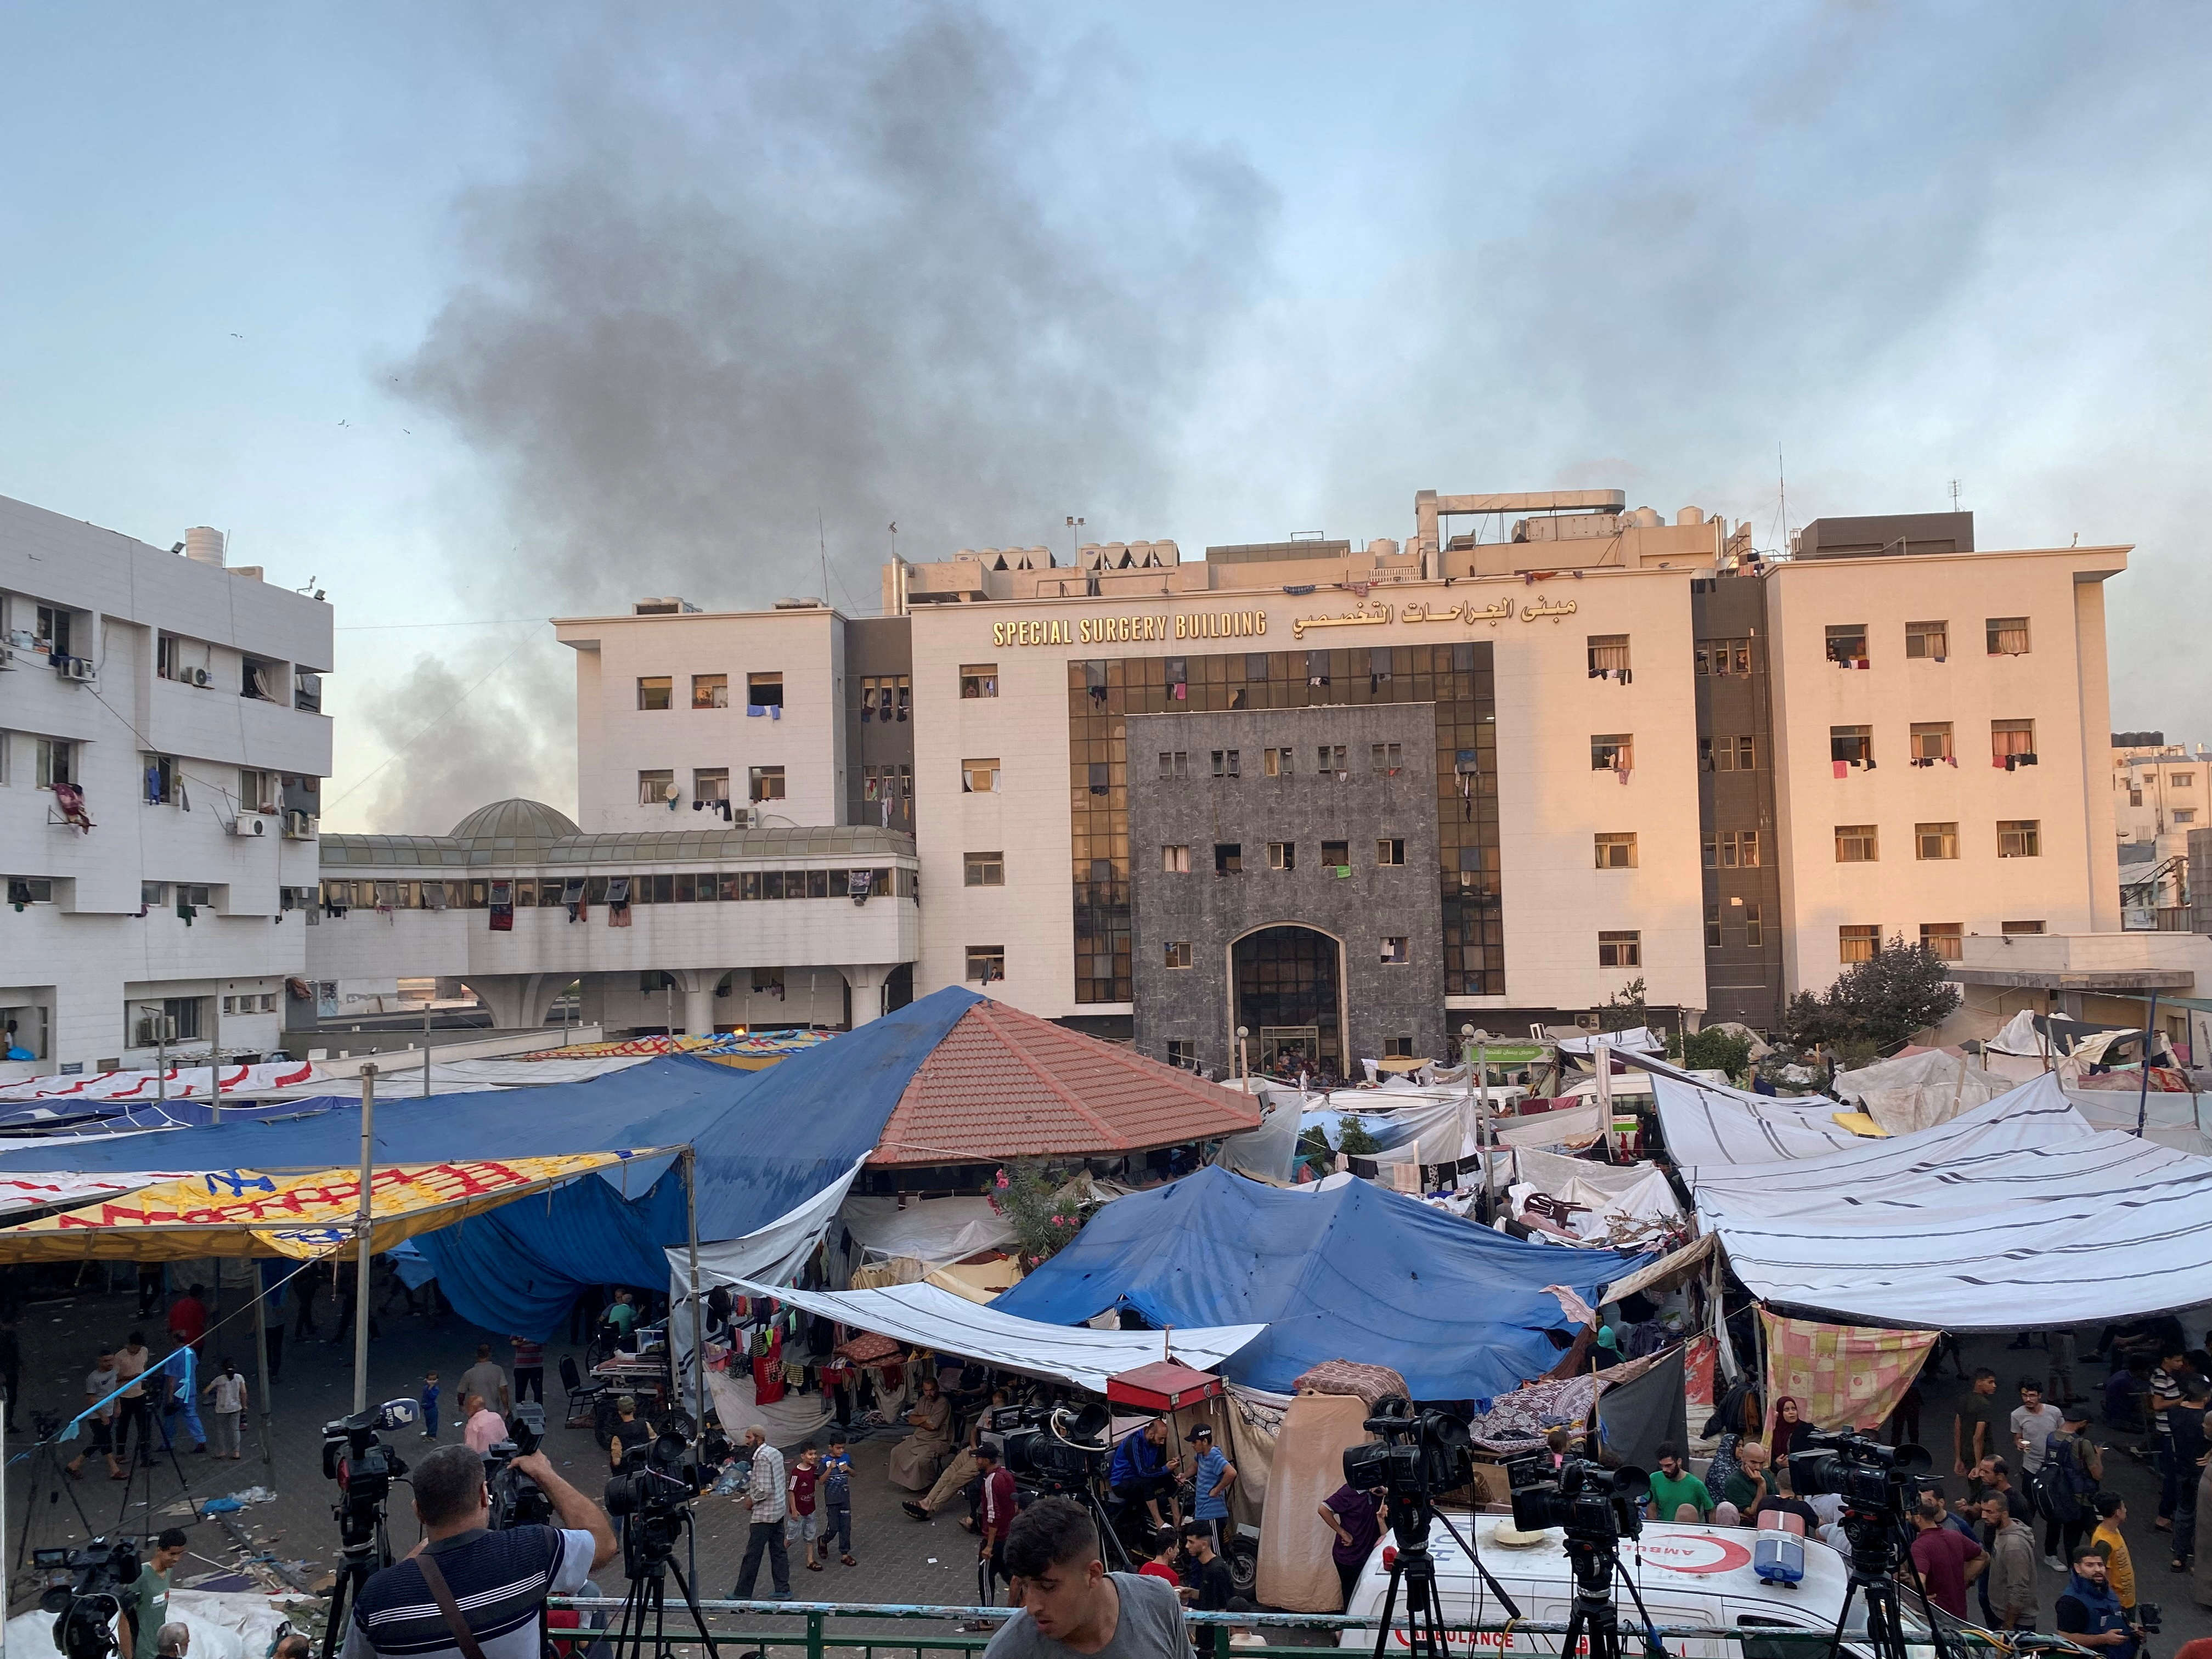 Smoke rises as displaced Palestinians take shelter at Al Shifa hospital, amid the ongoing conflict between Hamas and Israel, in Gaza City